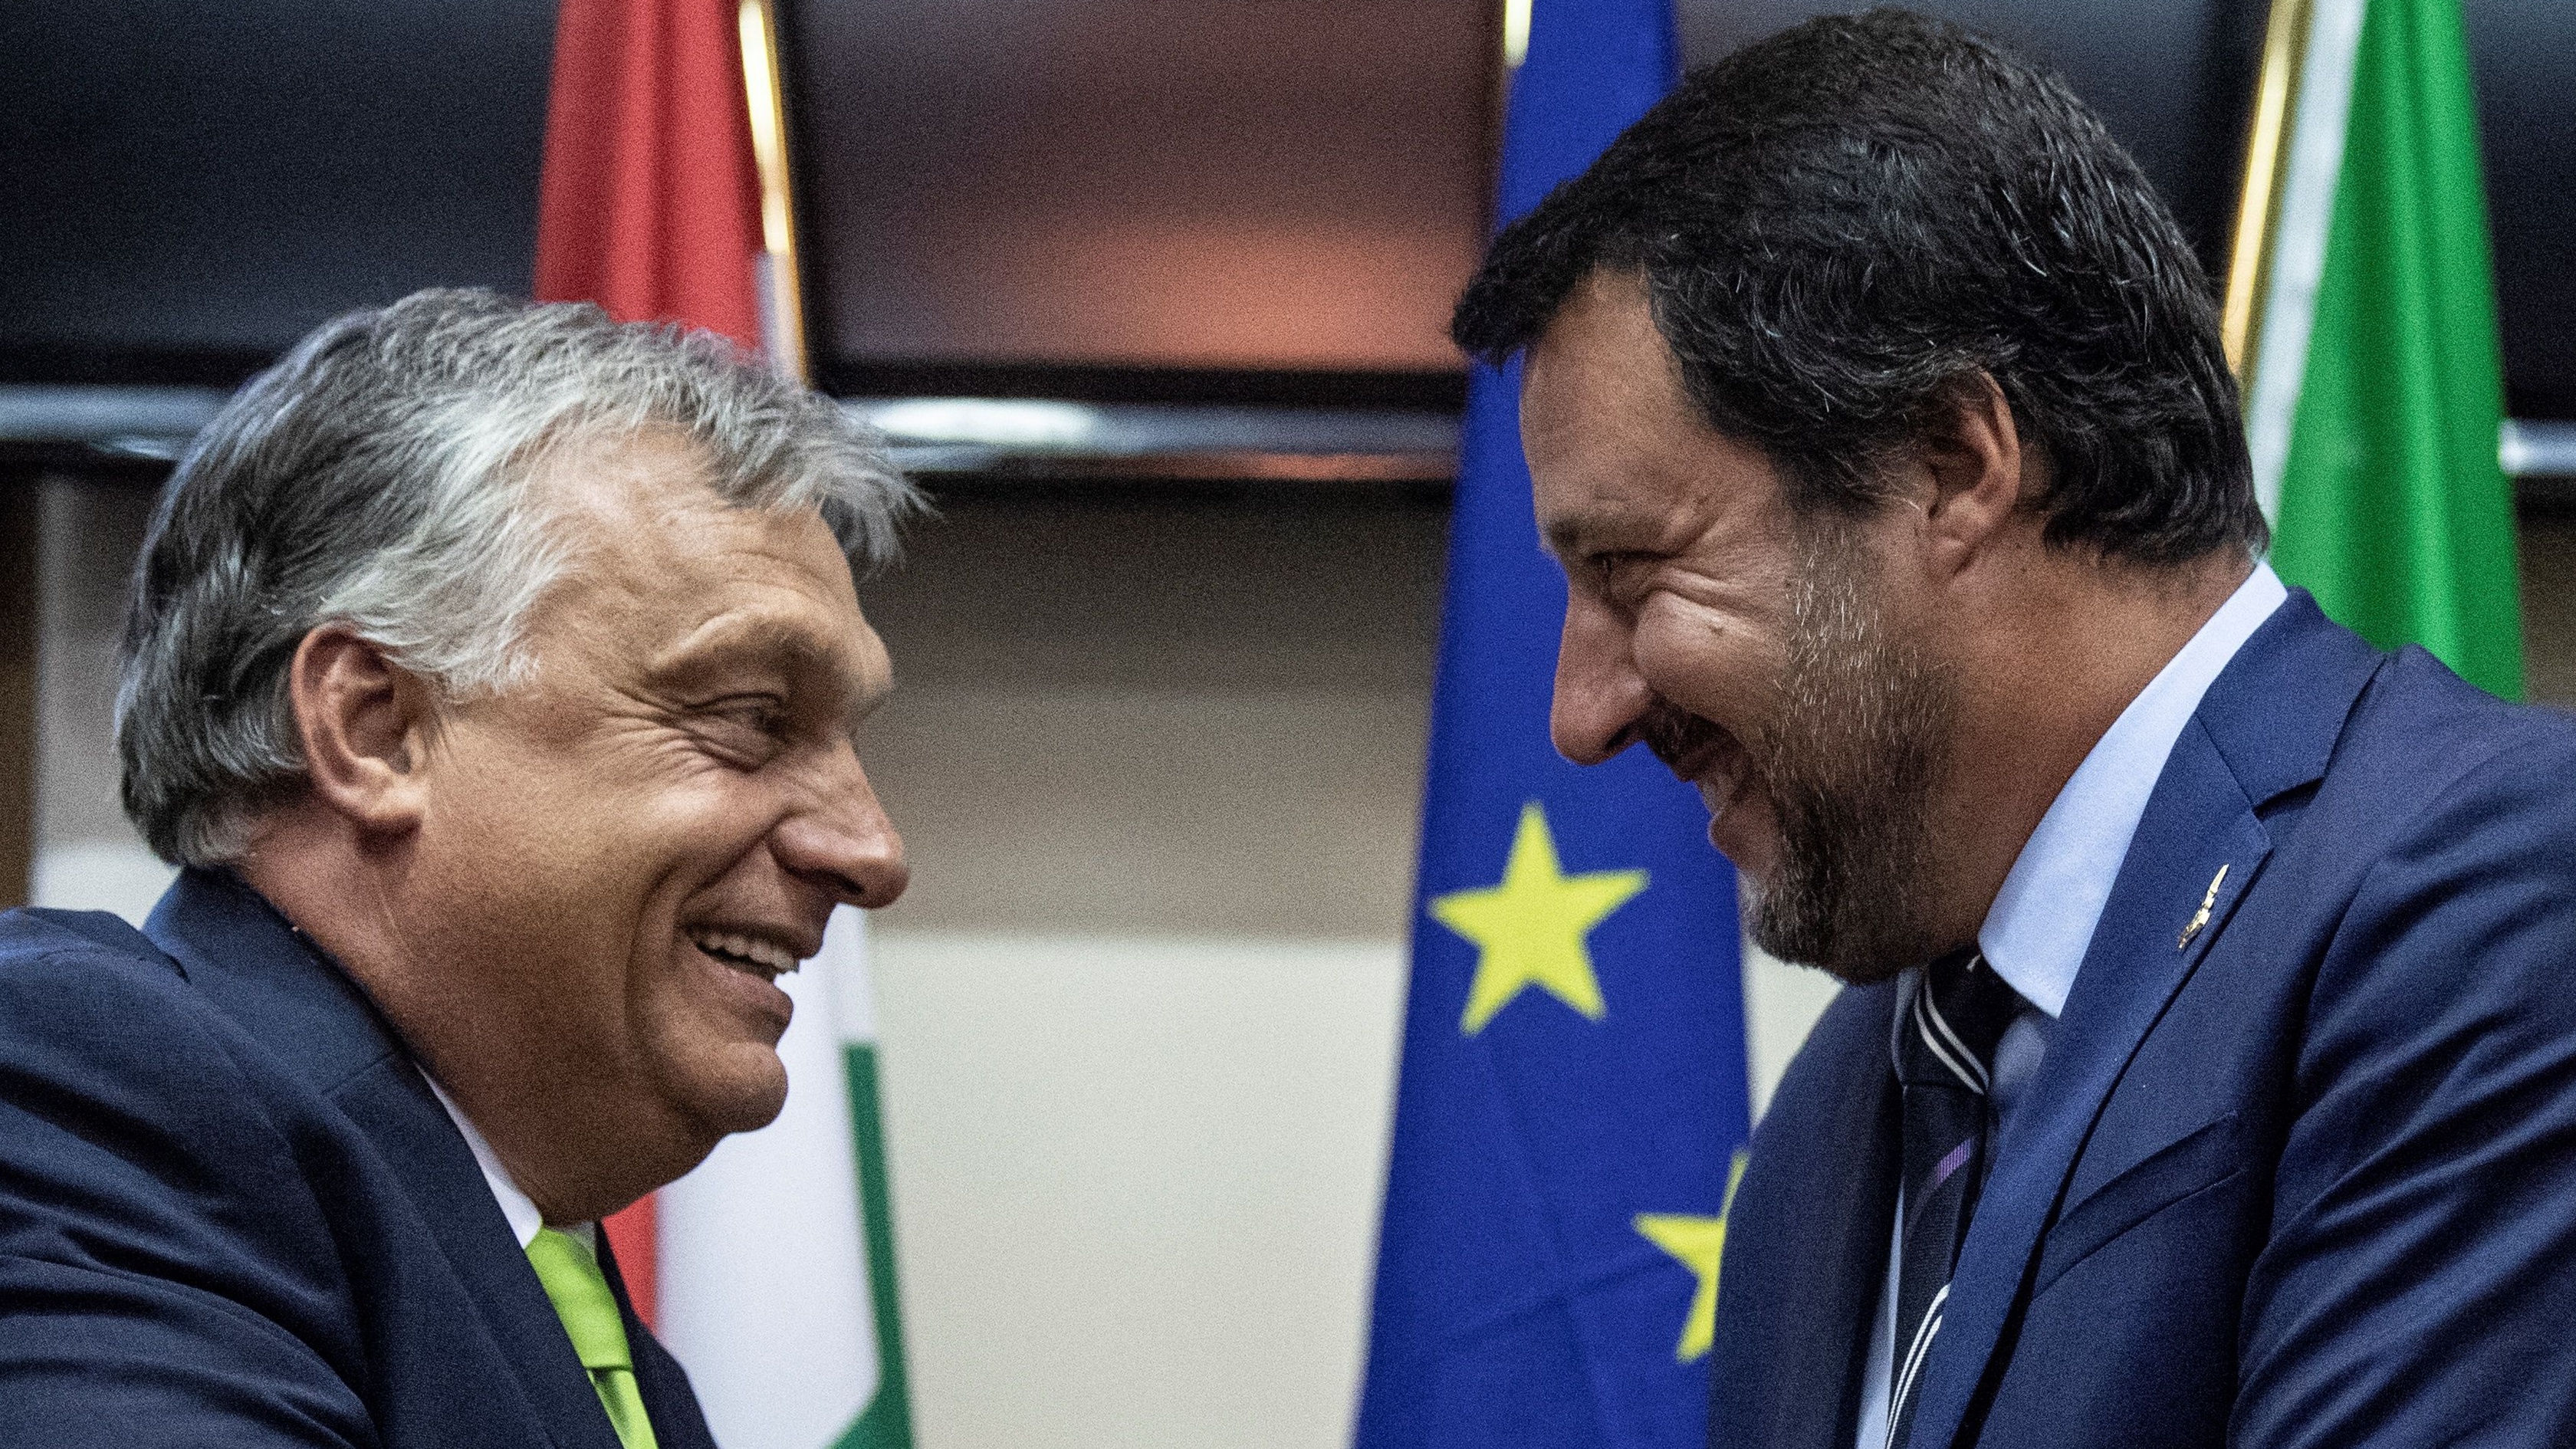 Viktor Orban and Matteo Salvini pictured in 2018